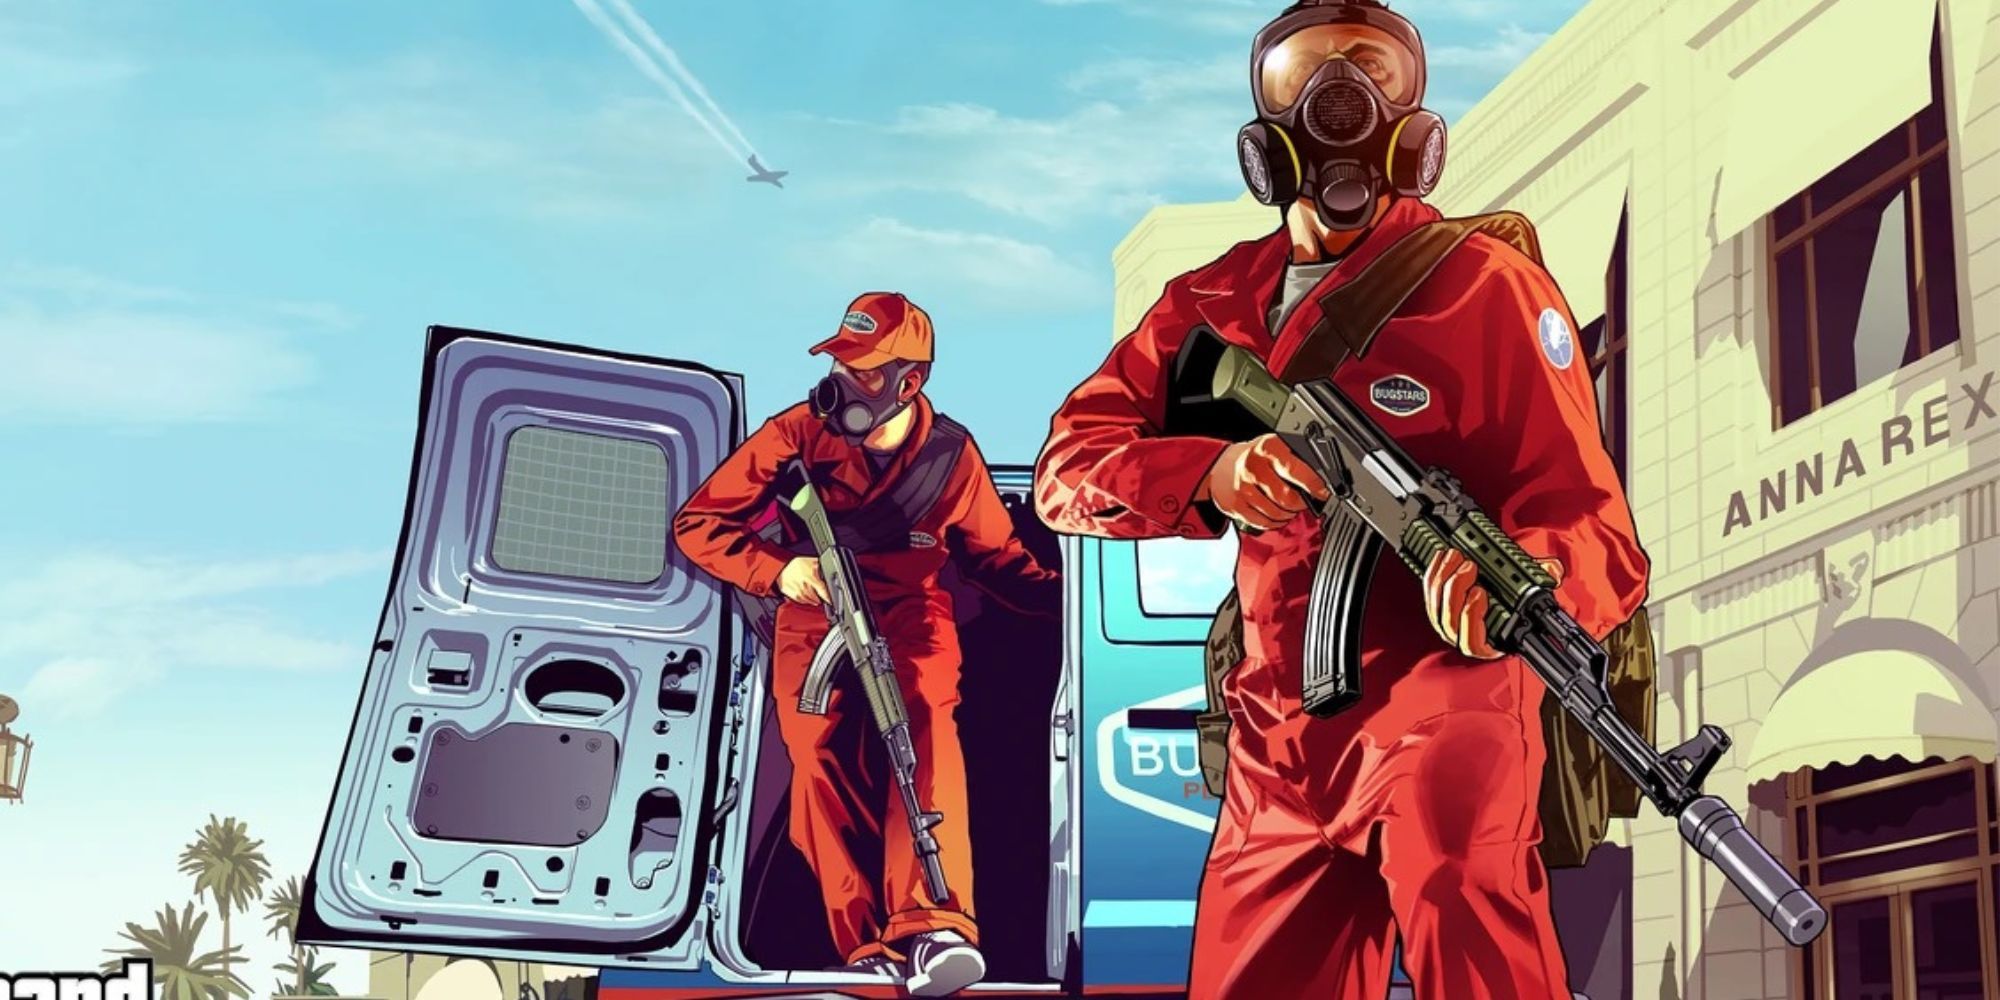 Grand Theft Auto two guys carryng a AK-47